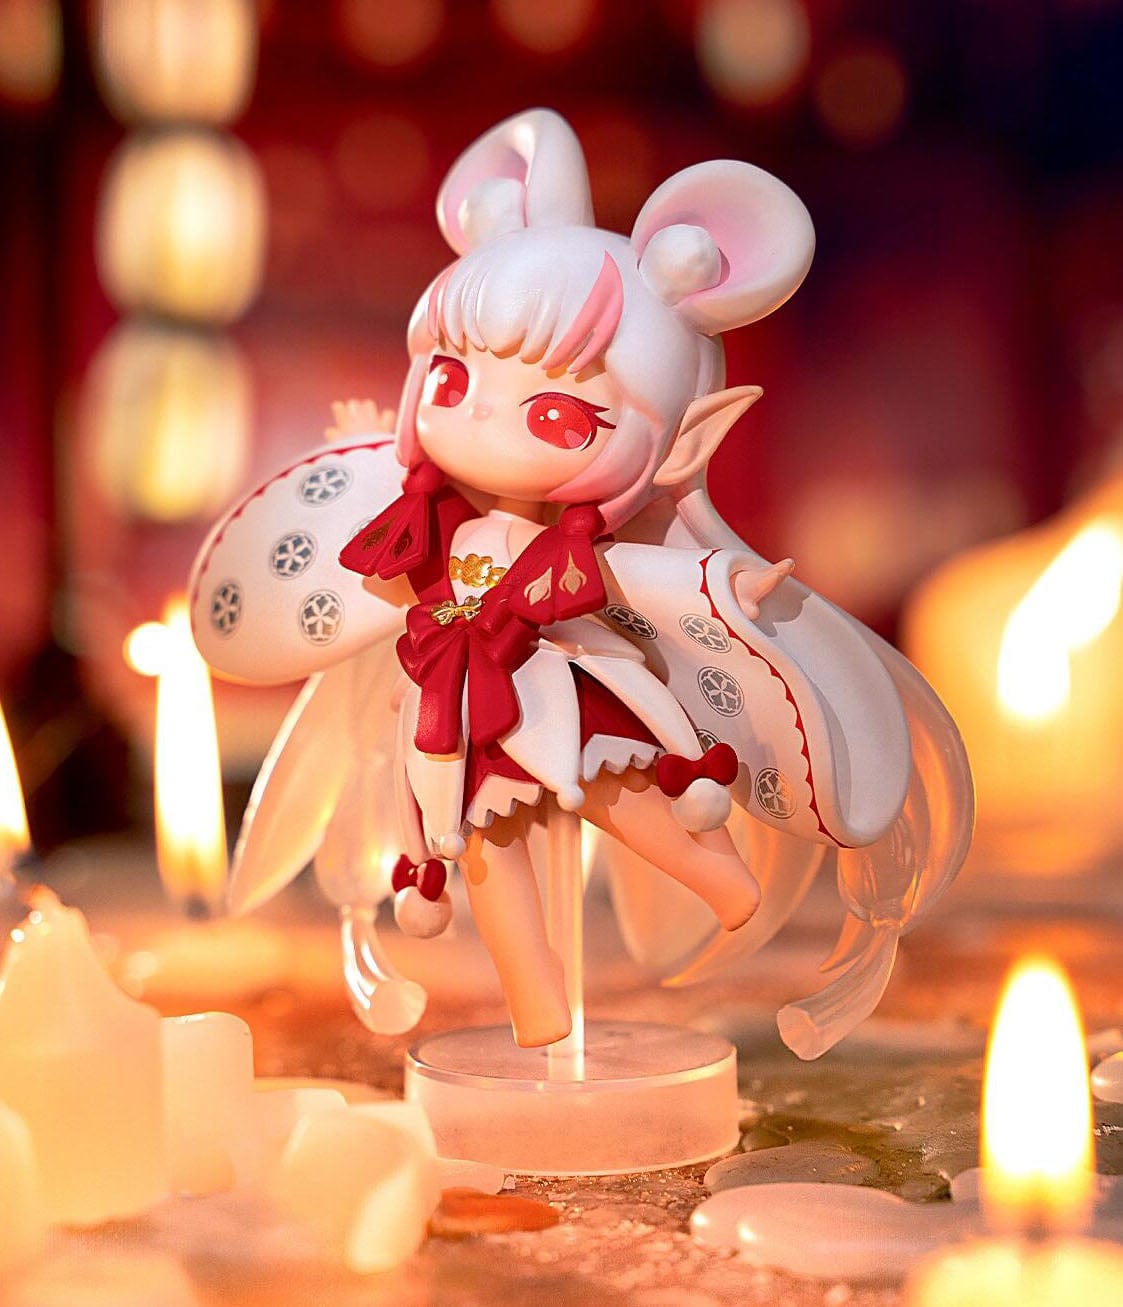 （Pre-order)SURI Journey to The West Series Blind Box